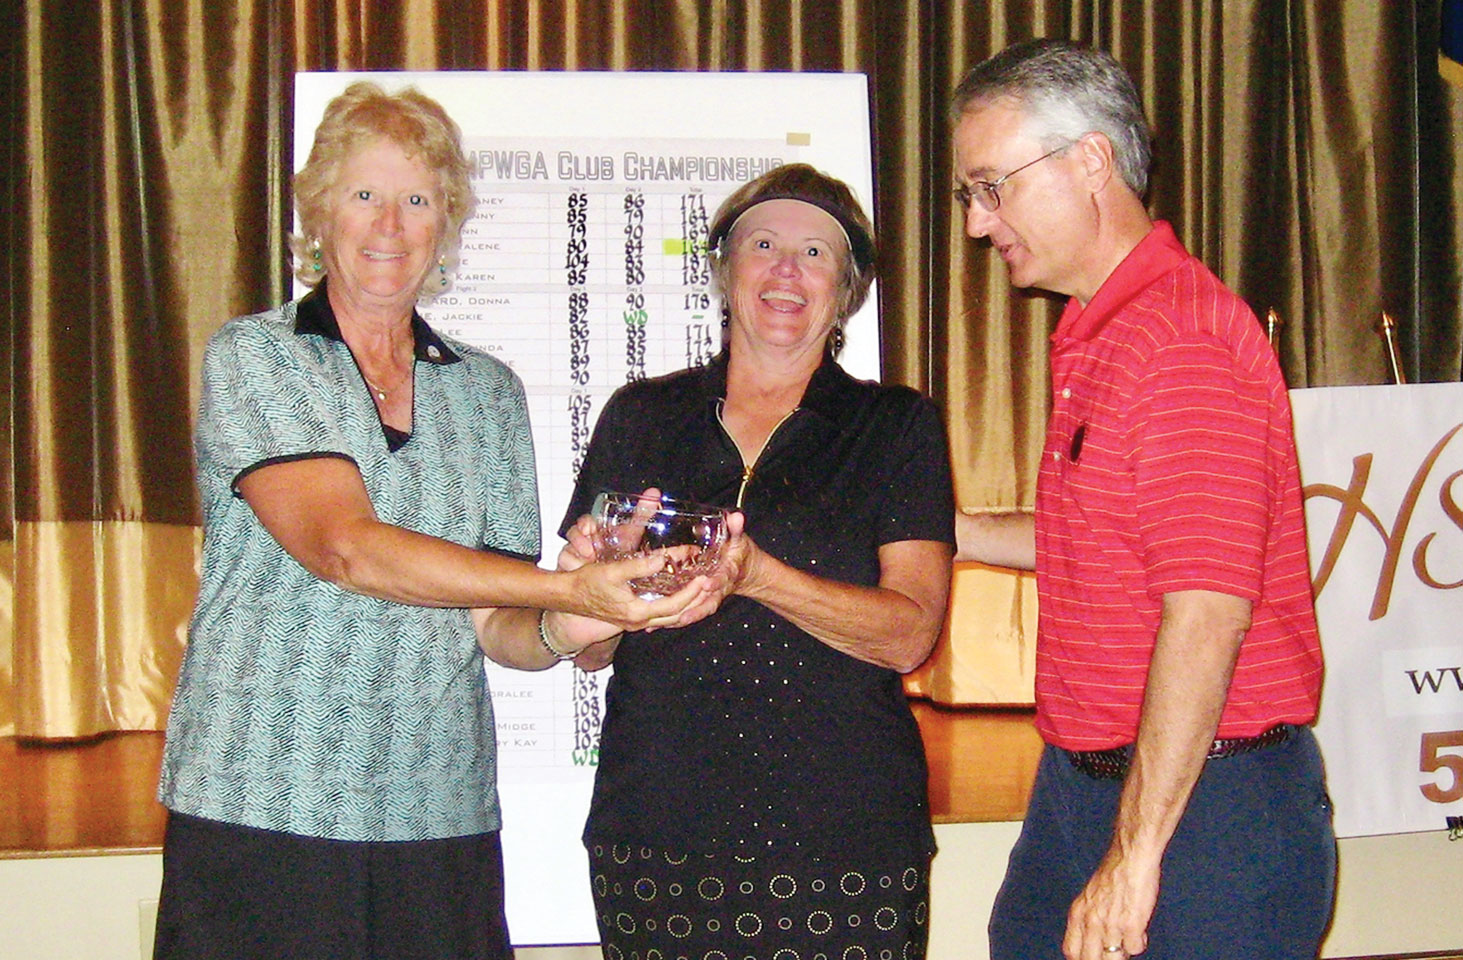 2015 Champion Janey Clausen, along with Pro Mike Jahaske, presenting the trophy to 2016 Champion Ralene Peters